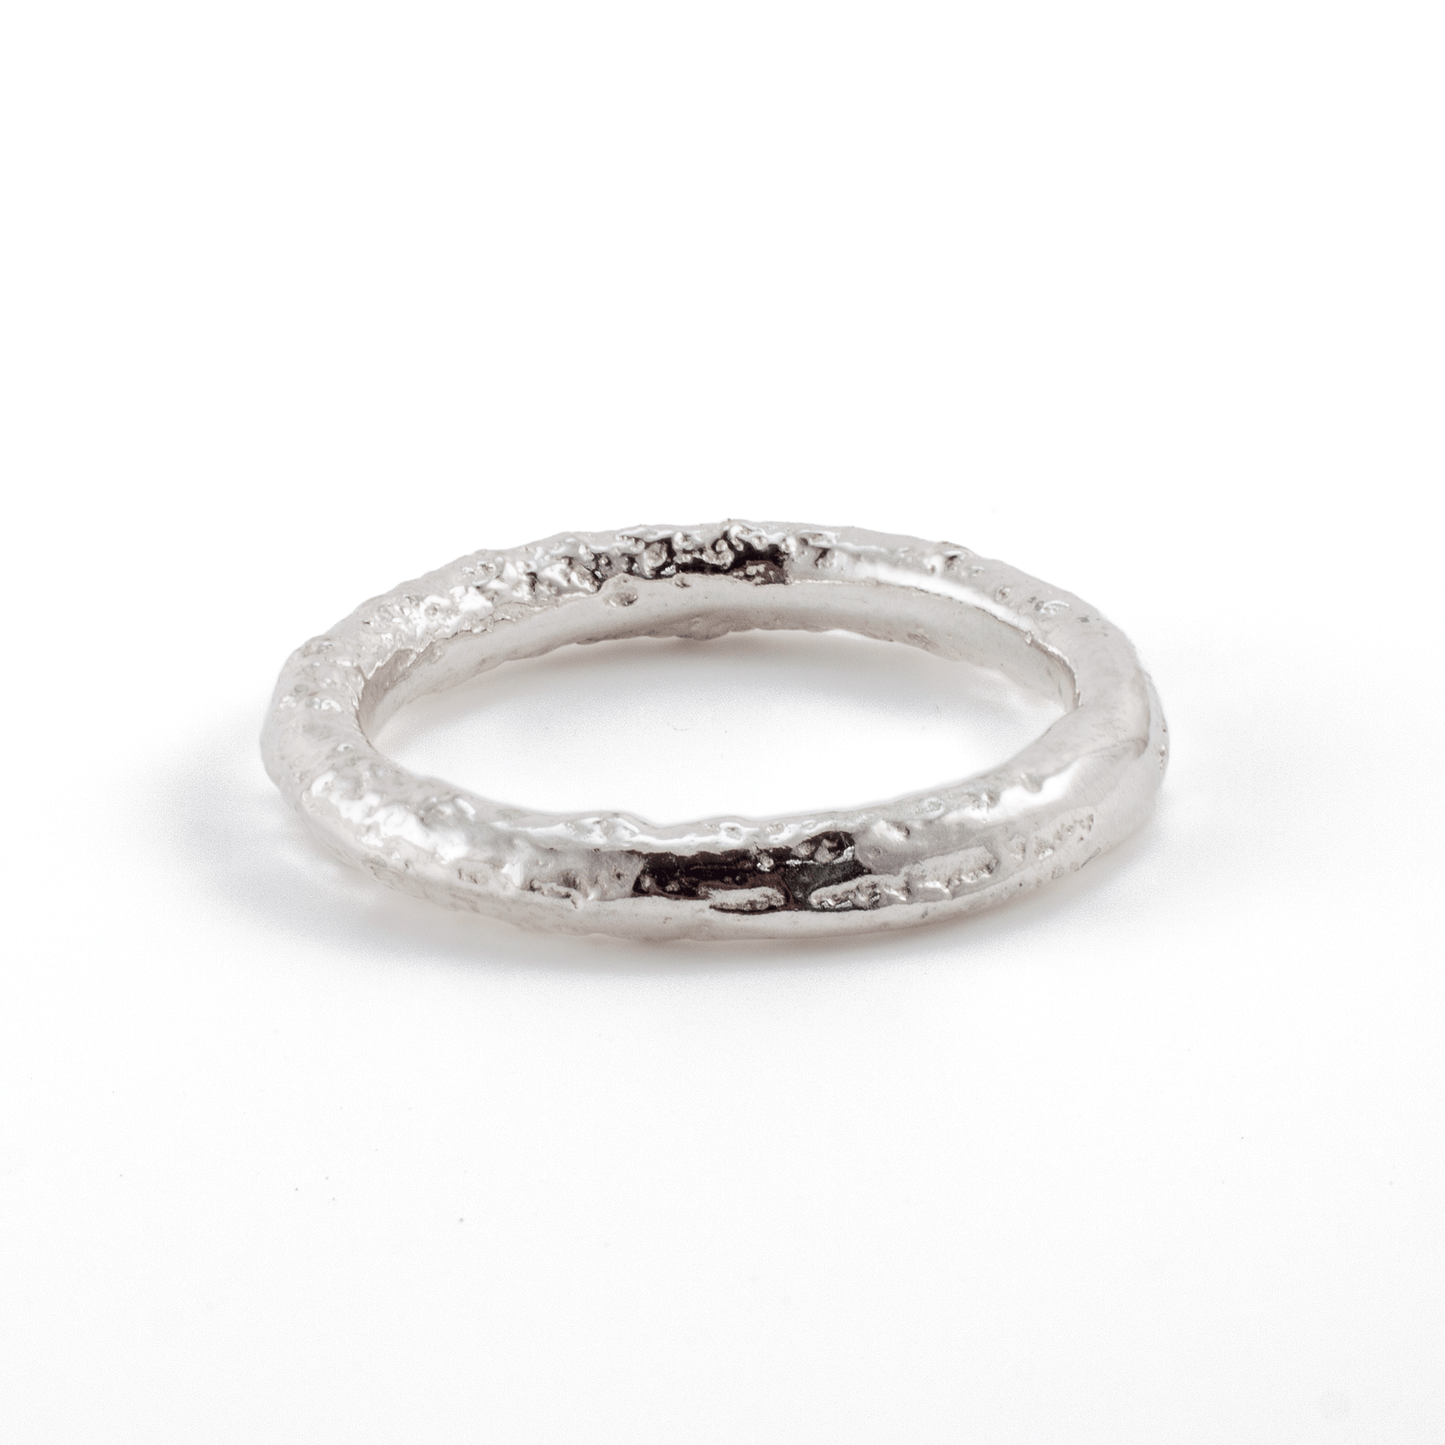 Round Sandcast Stacking Ring